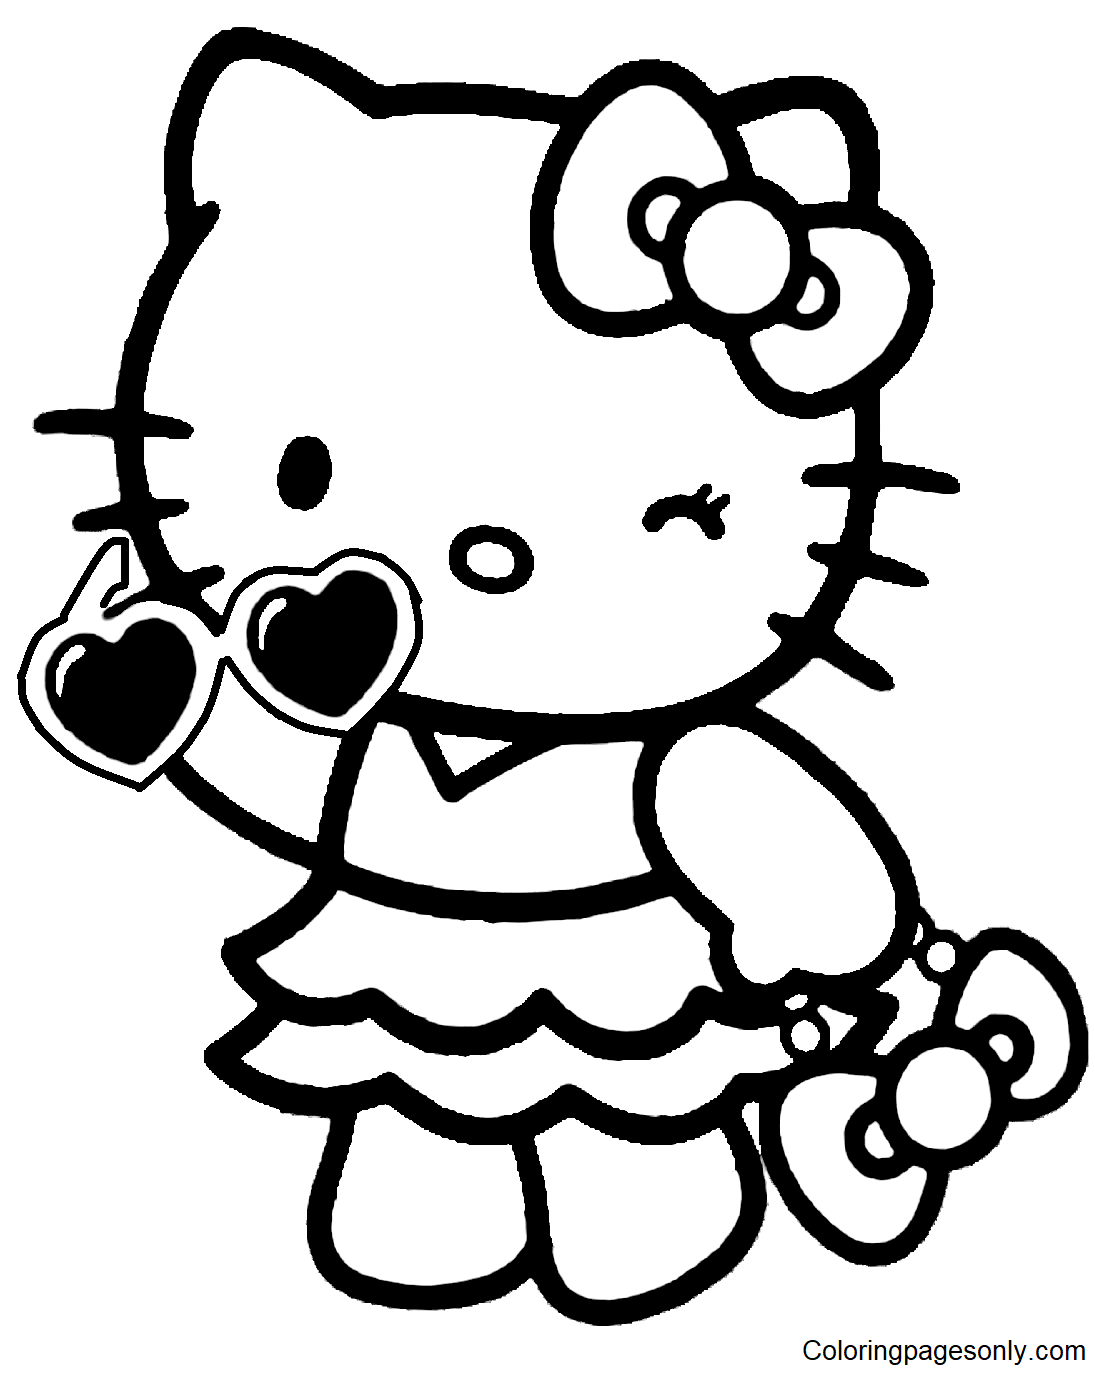 Hello Kitty image Coloring Page